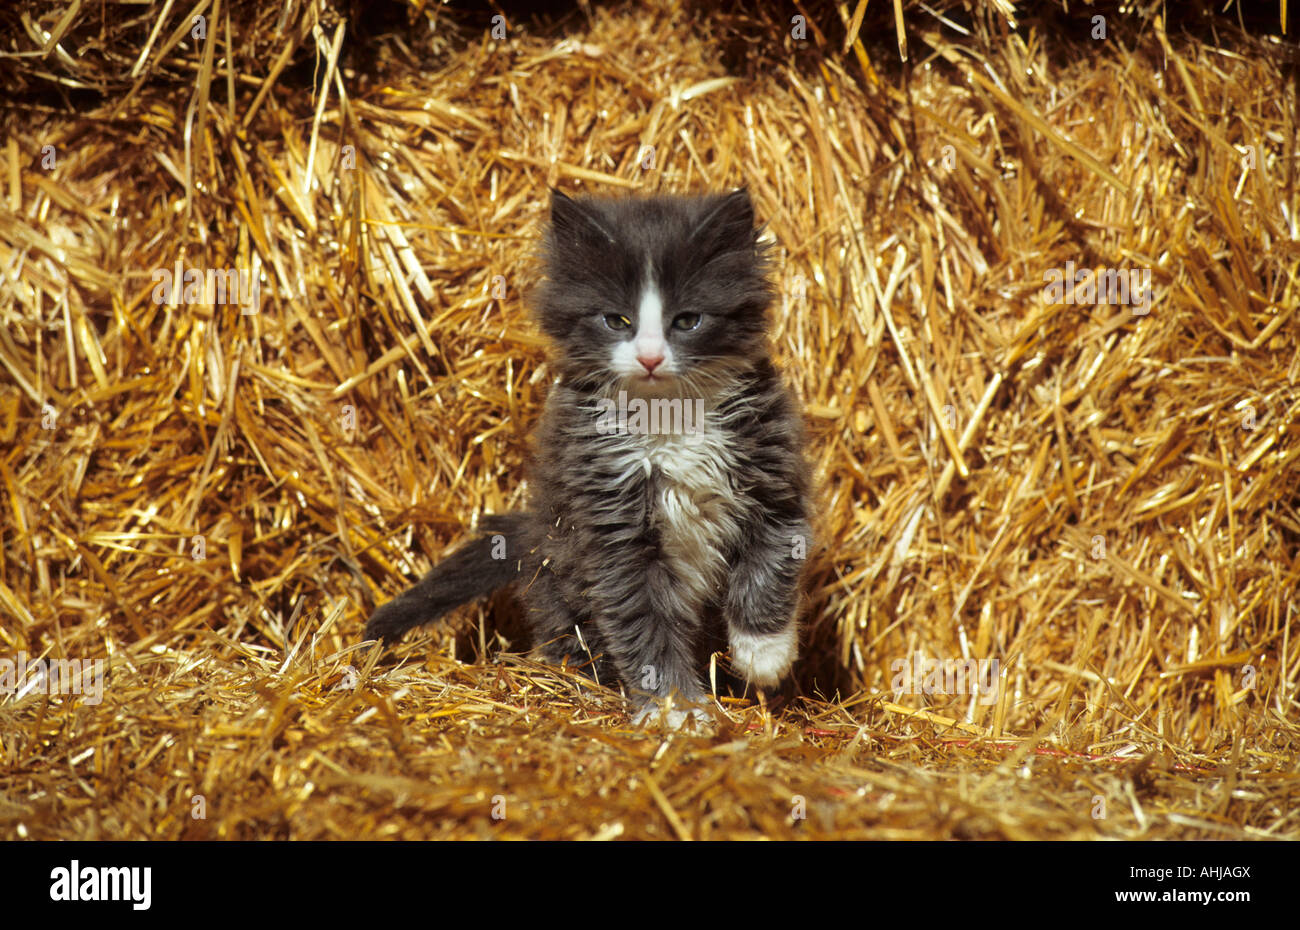 junge Katze im Stroh young cat in straw Stock Photo